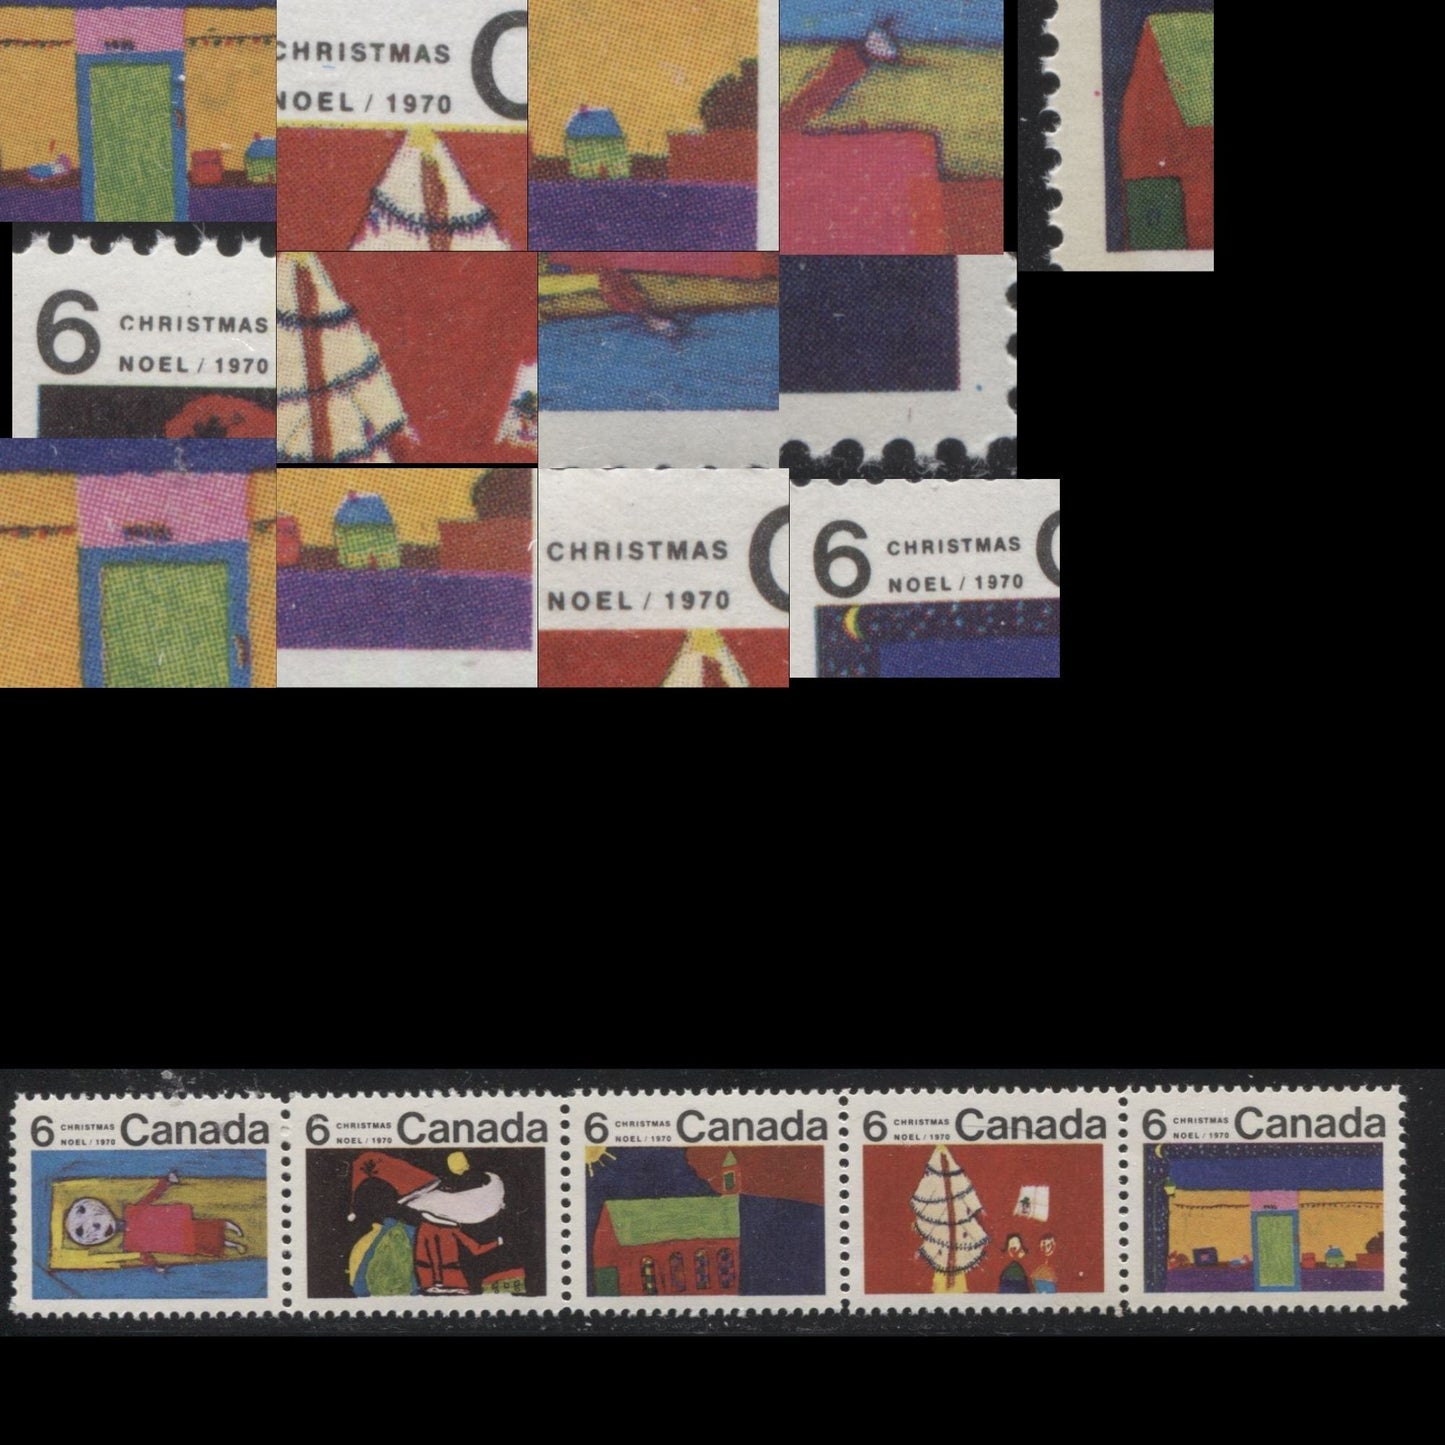 Lot 166 Canada #524p-528p 6c Multicoloured 1970 Christmas Issue, A Nearly Complete Set of 12 Winnipeg Tagged Constant Plate Varieties From Combination 4, Ribbed HB12 Paper, Perf. 11.9